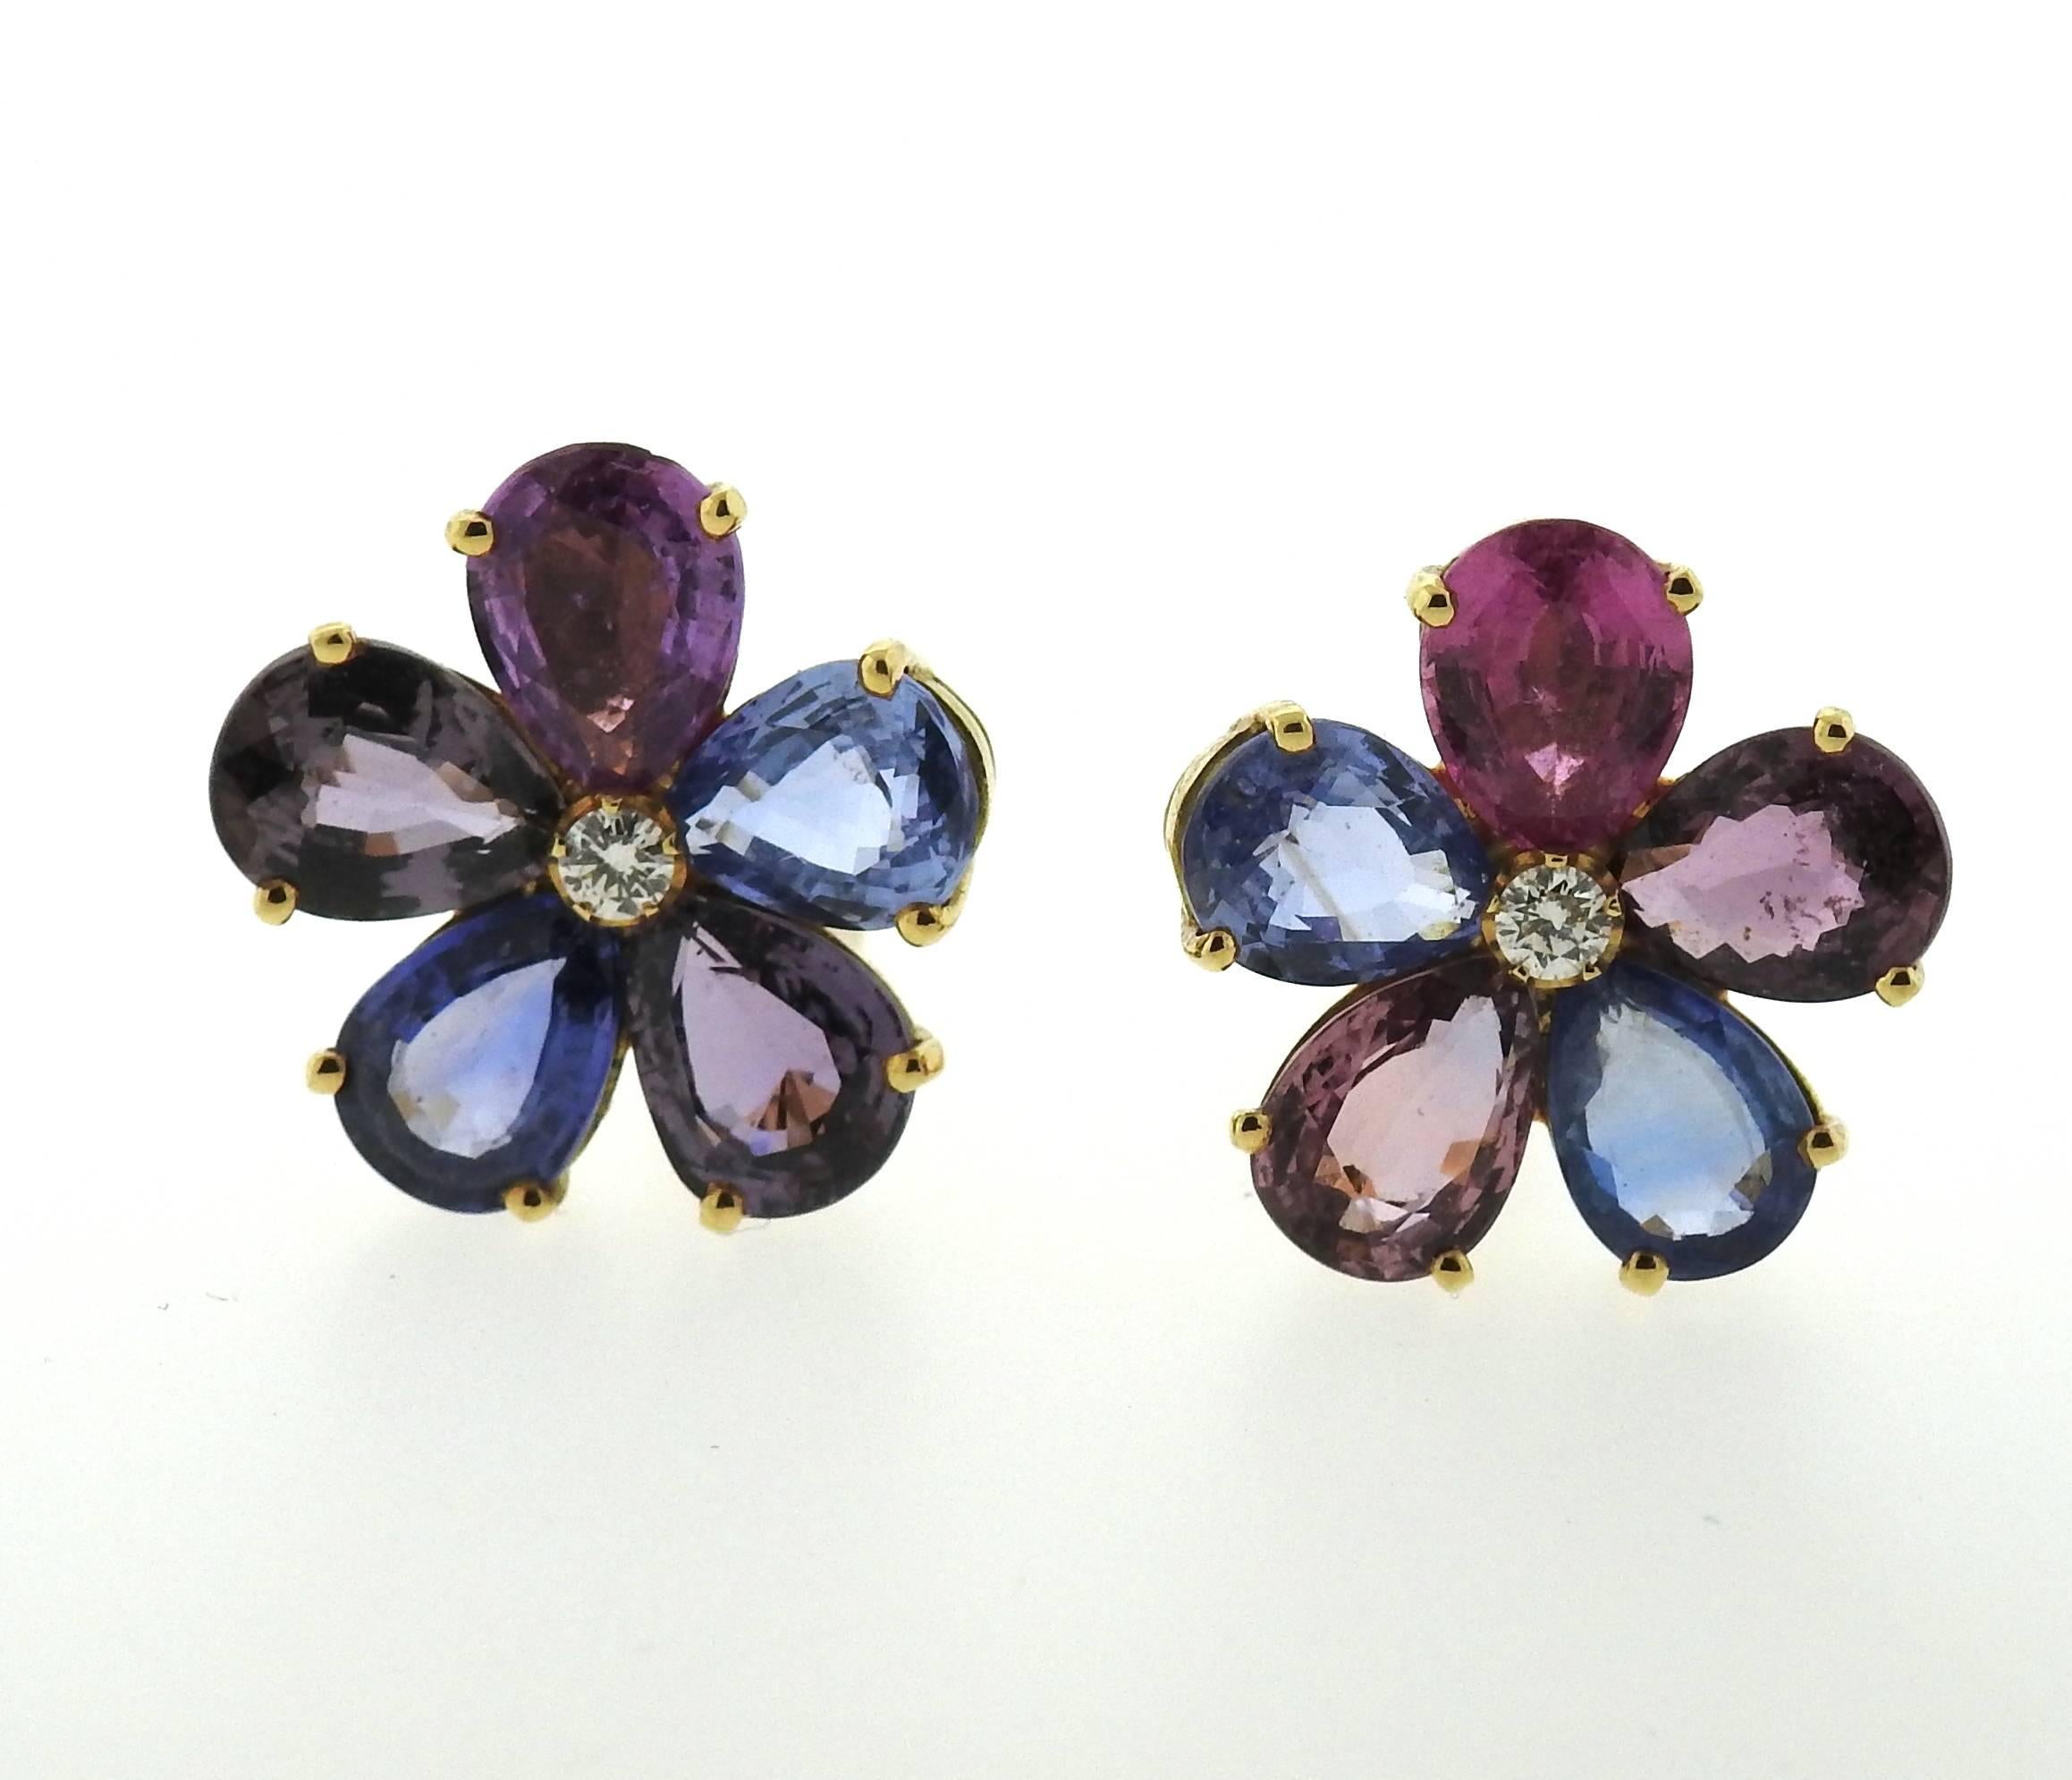 A pair of 18k yellow gold flower earrings, crafted by Bulgari, featuring approx. 0.16ctw in G/VS diamonds and multi color sapphire petals. Earrings are 20mm x 19mm. Marked: Bvlgari, 750, made in Italy . Weight - 16 grams 